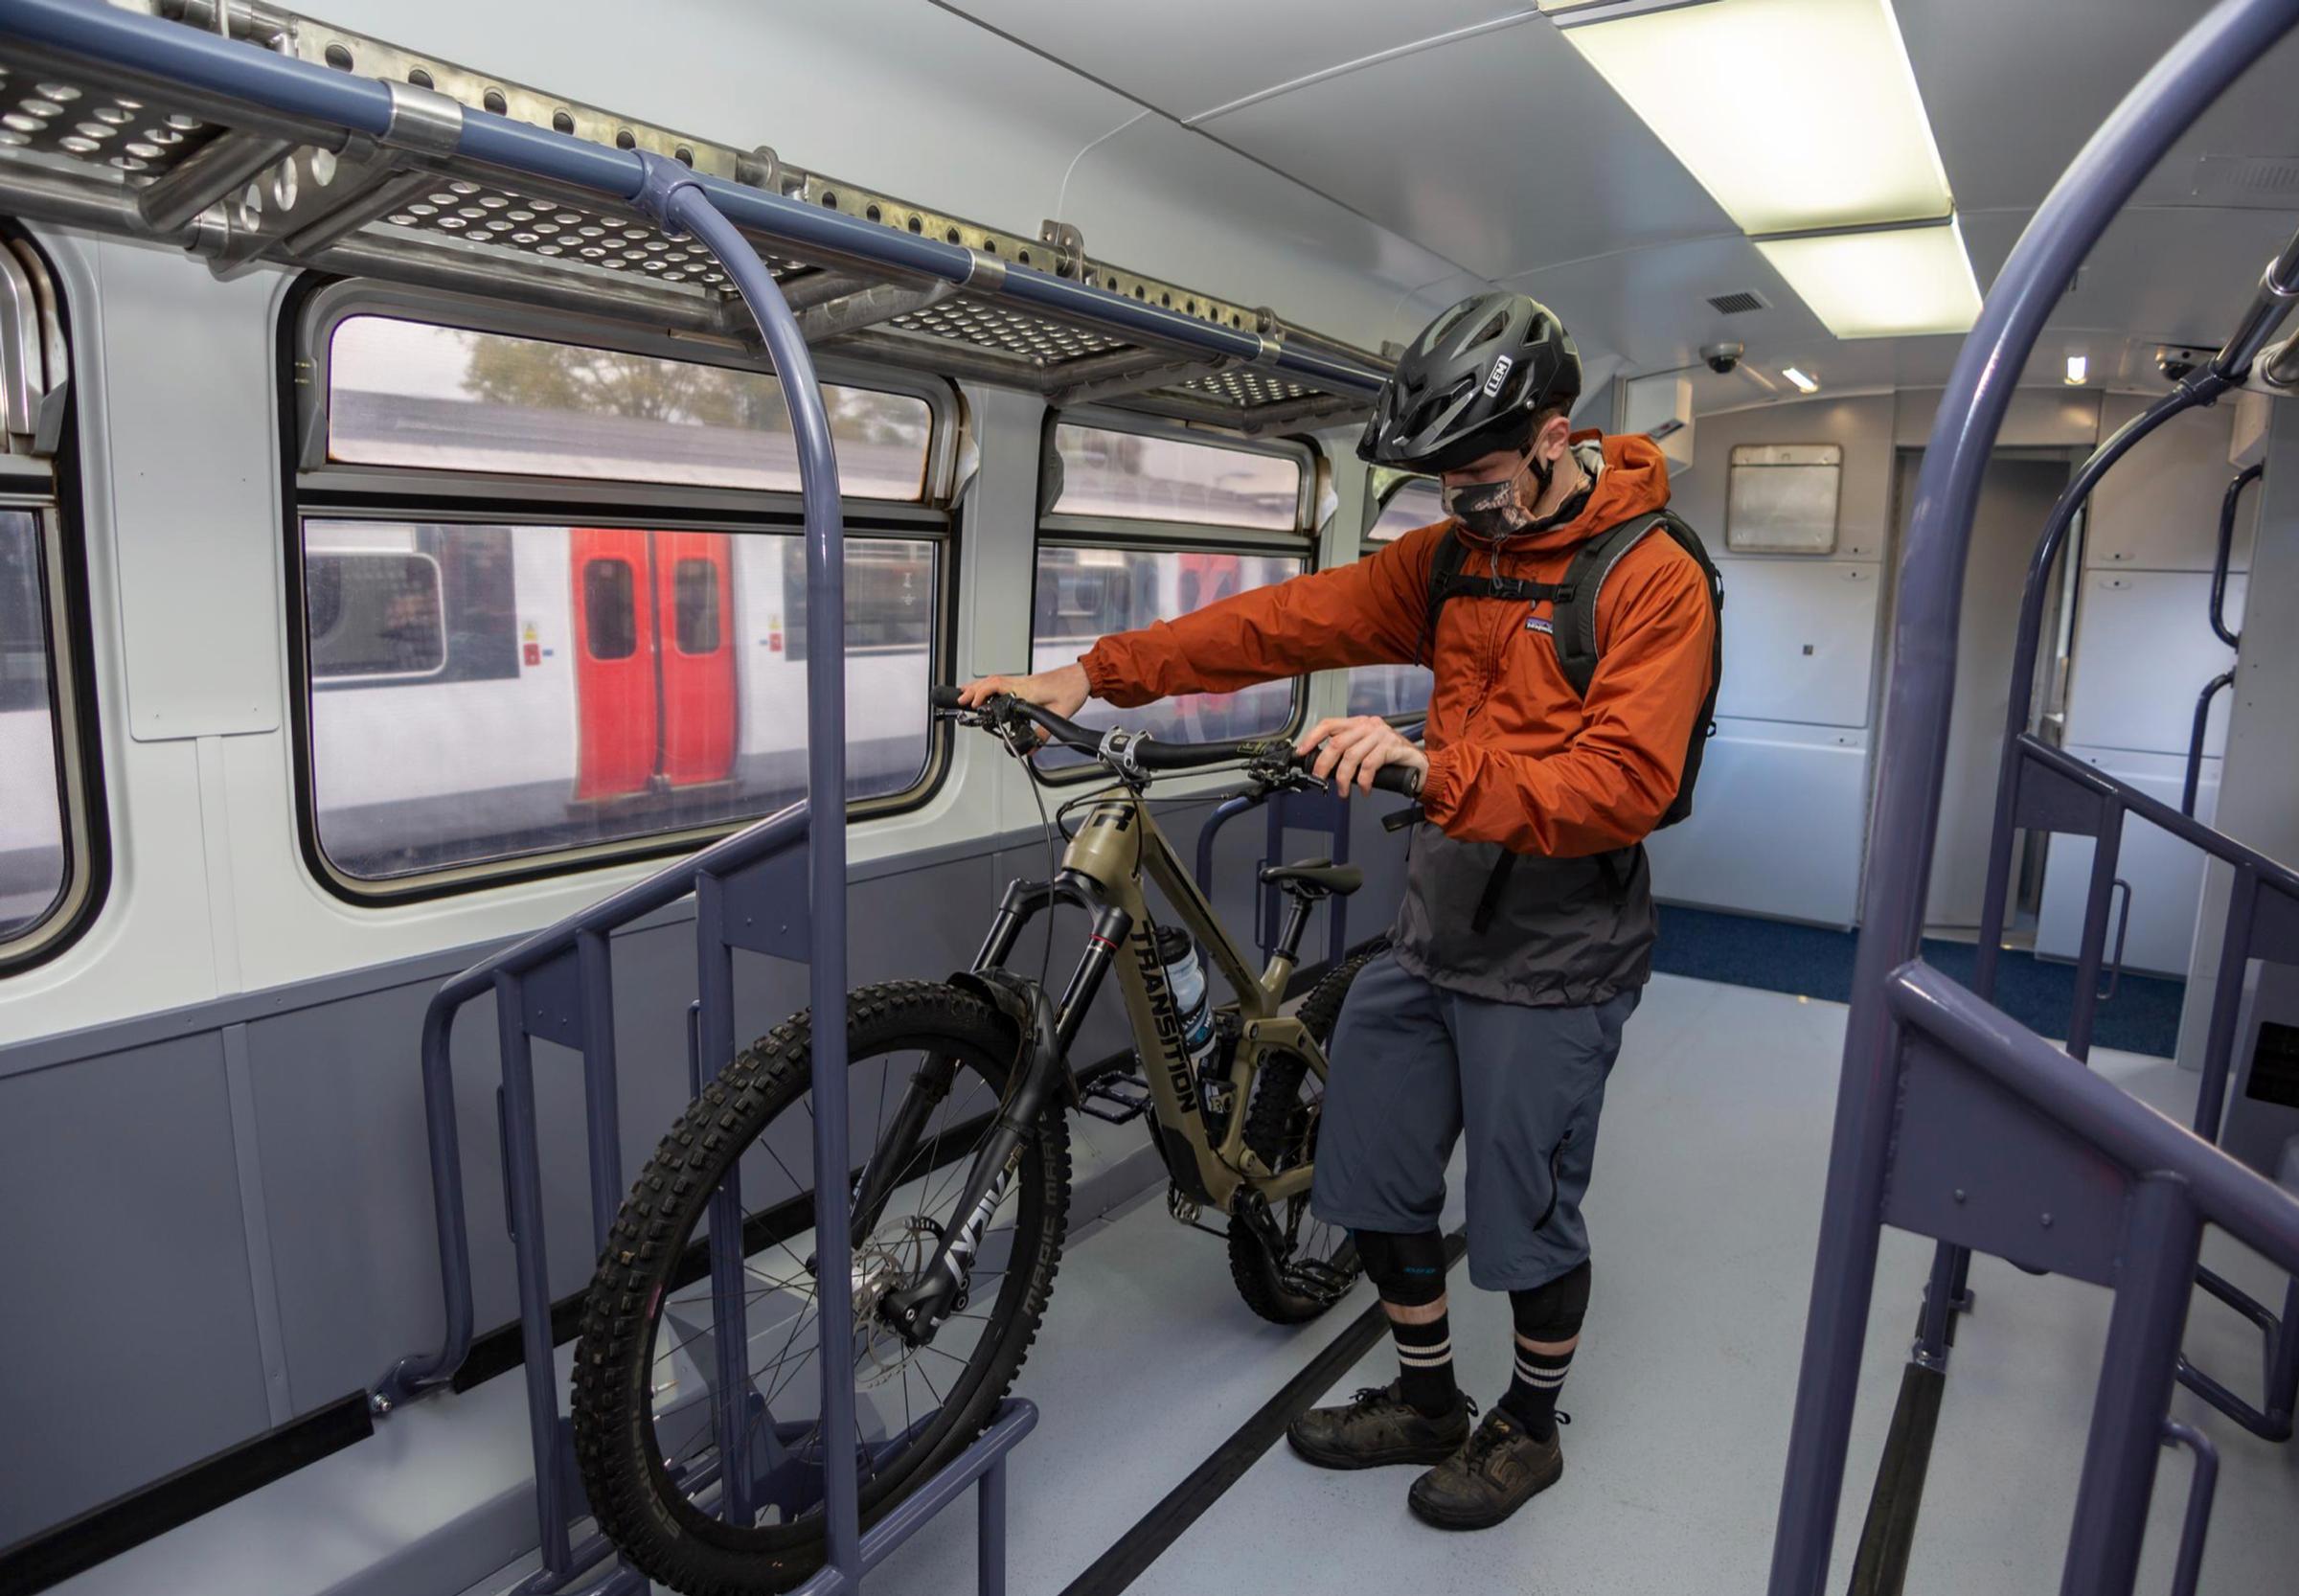 ScotRail has customised carriages to carry more bikes